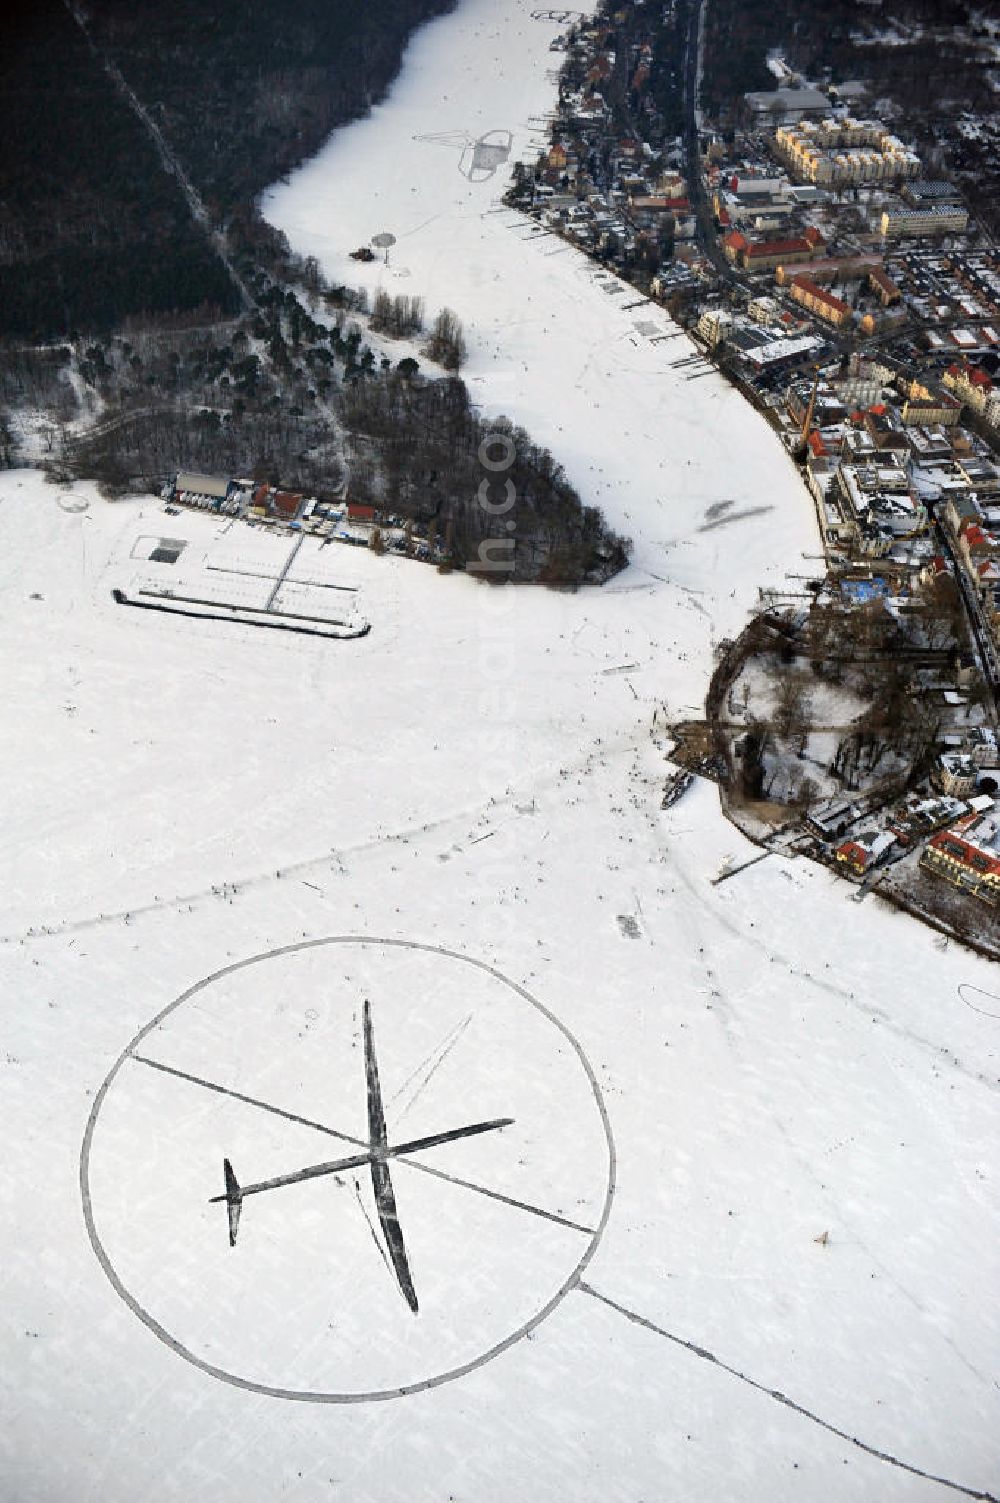 Aerial image Berlin - Wintry area of the Flight Route protest action on the snowy, icy Berlin Müggelsee